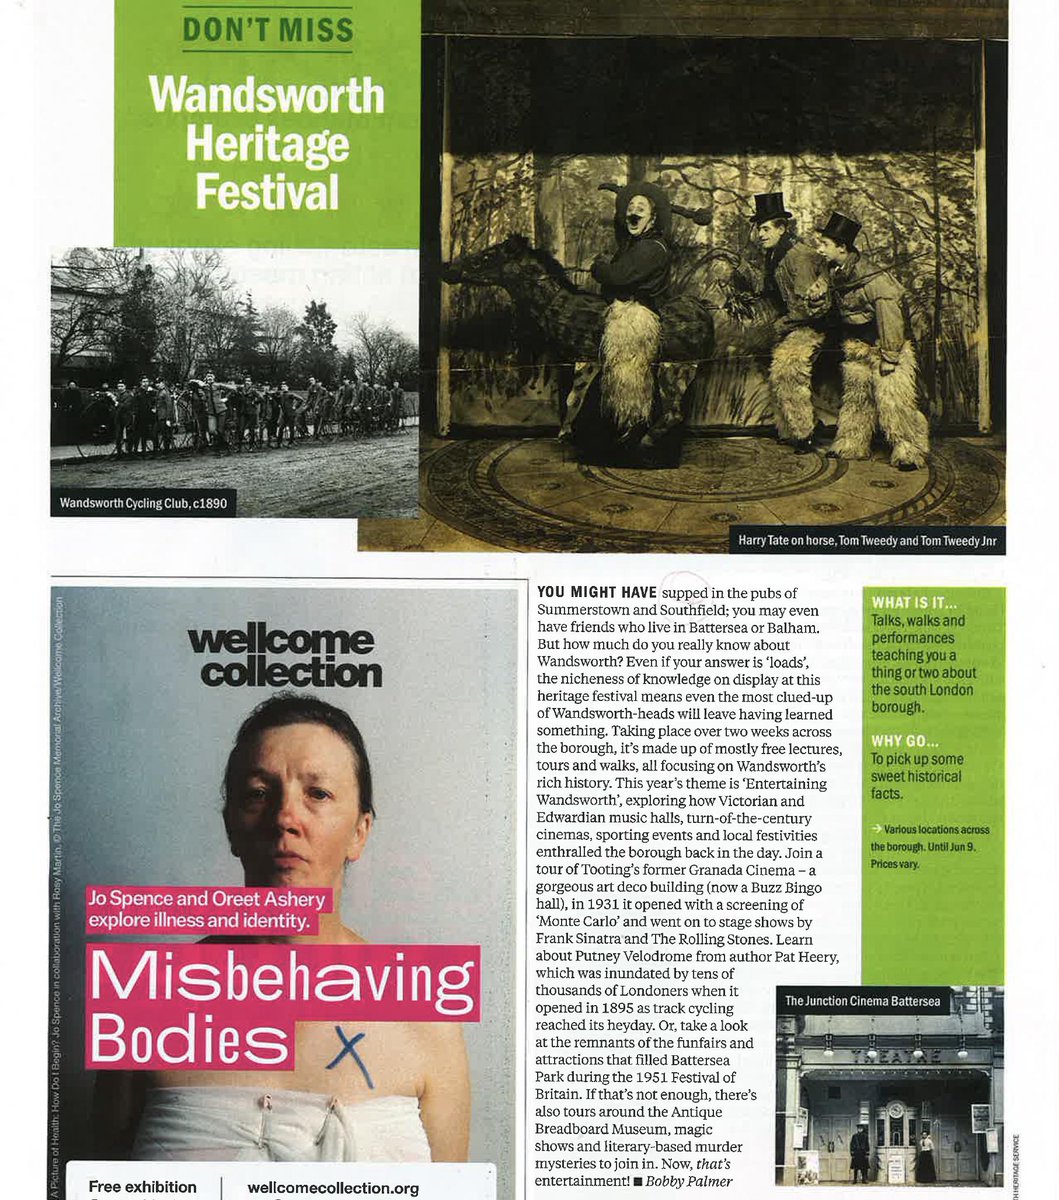 Don’t miss the #WandsworthHeritageFestival in the latest @TimeOutLondon 👀